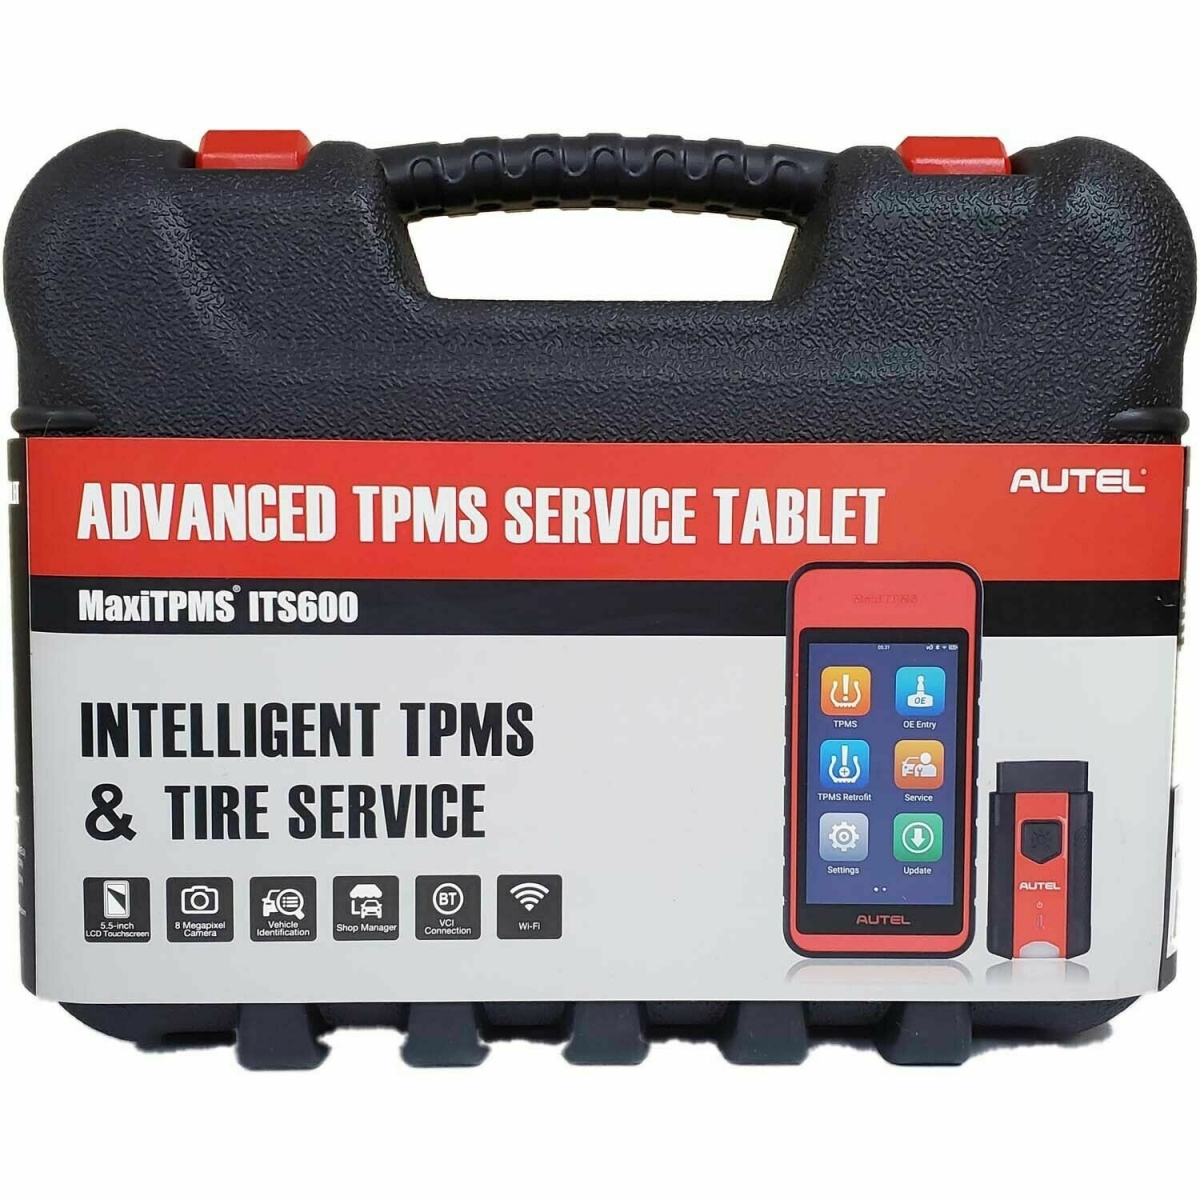 Picture of Autel AUL-ITS600 MaxiTPMS ITS600 Intelligent Tire Service Tablet